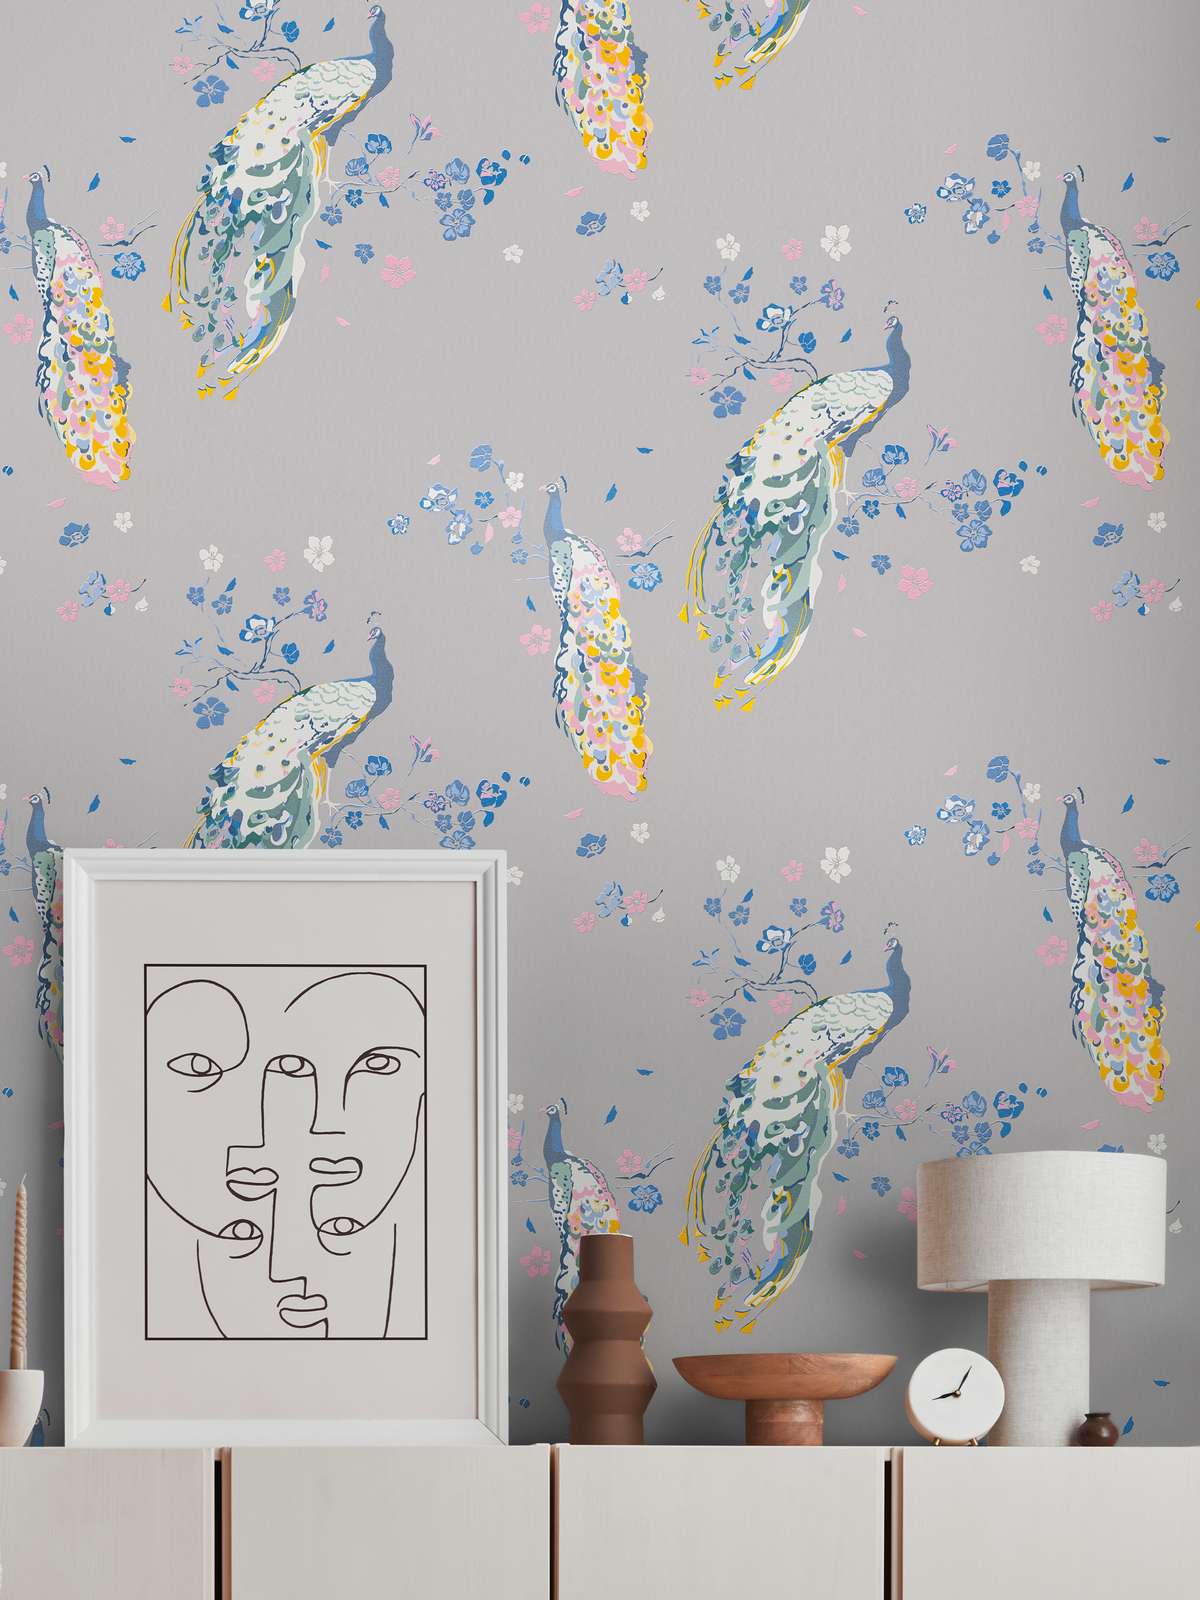             Non-woven wallpaper with peacock pattern and glossy effect - grey, blue, colourful
        